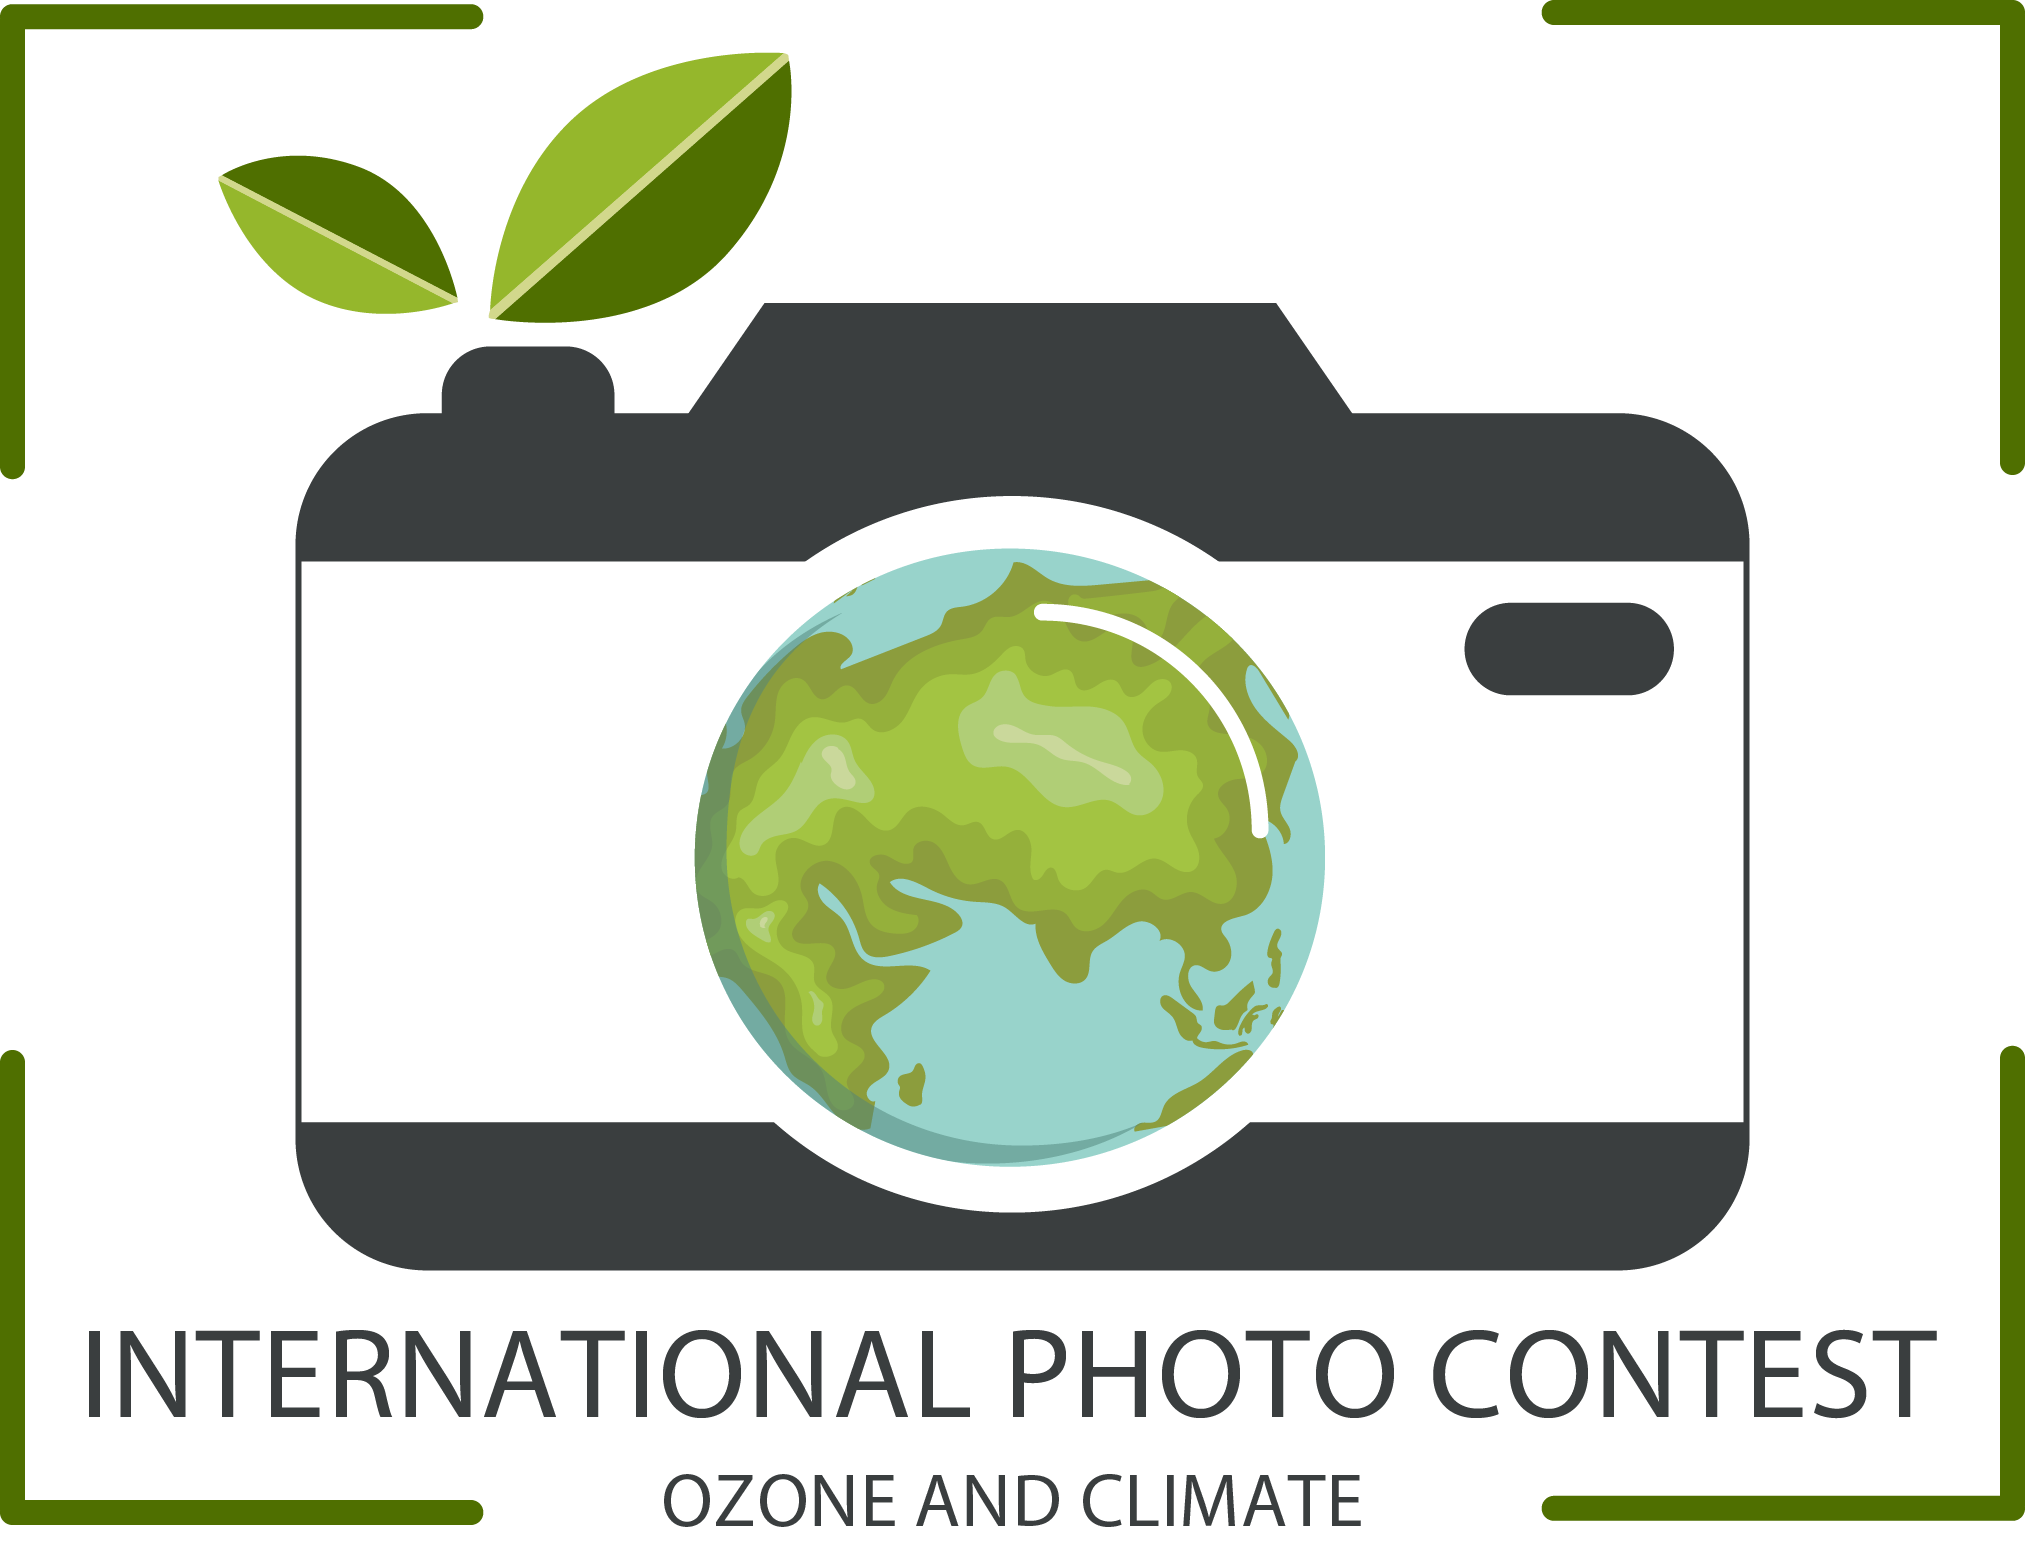 Photograph clipart photography contest. International photo dedicated to